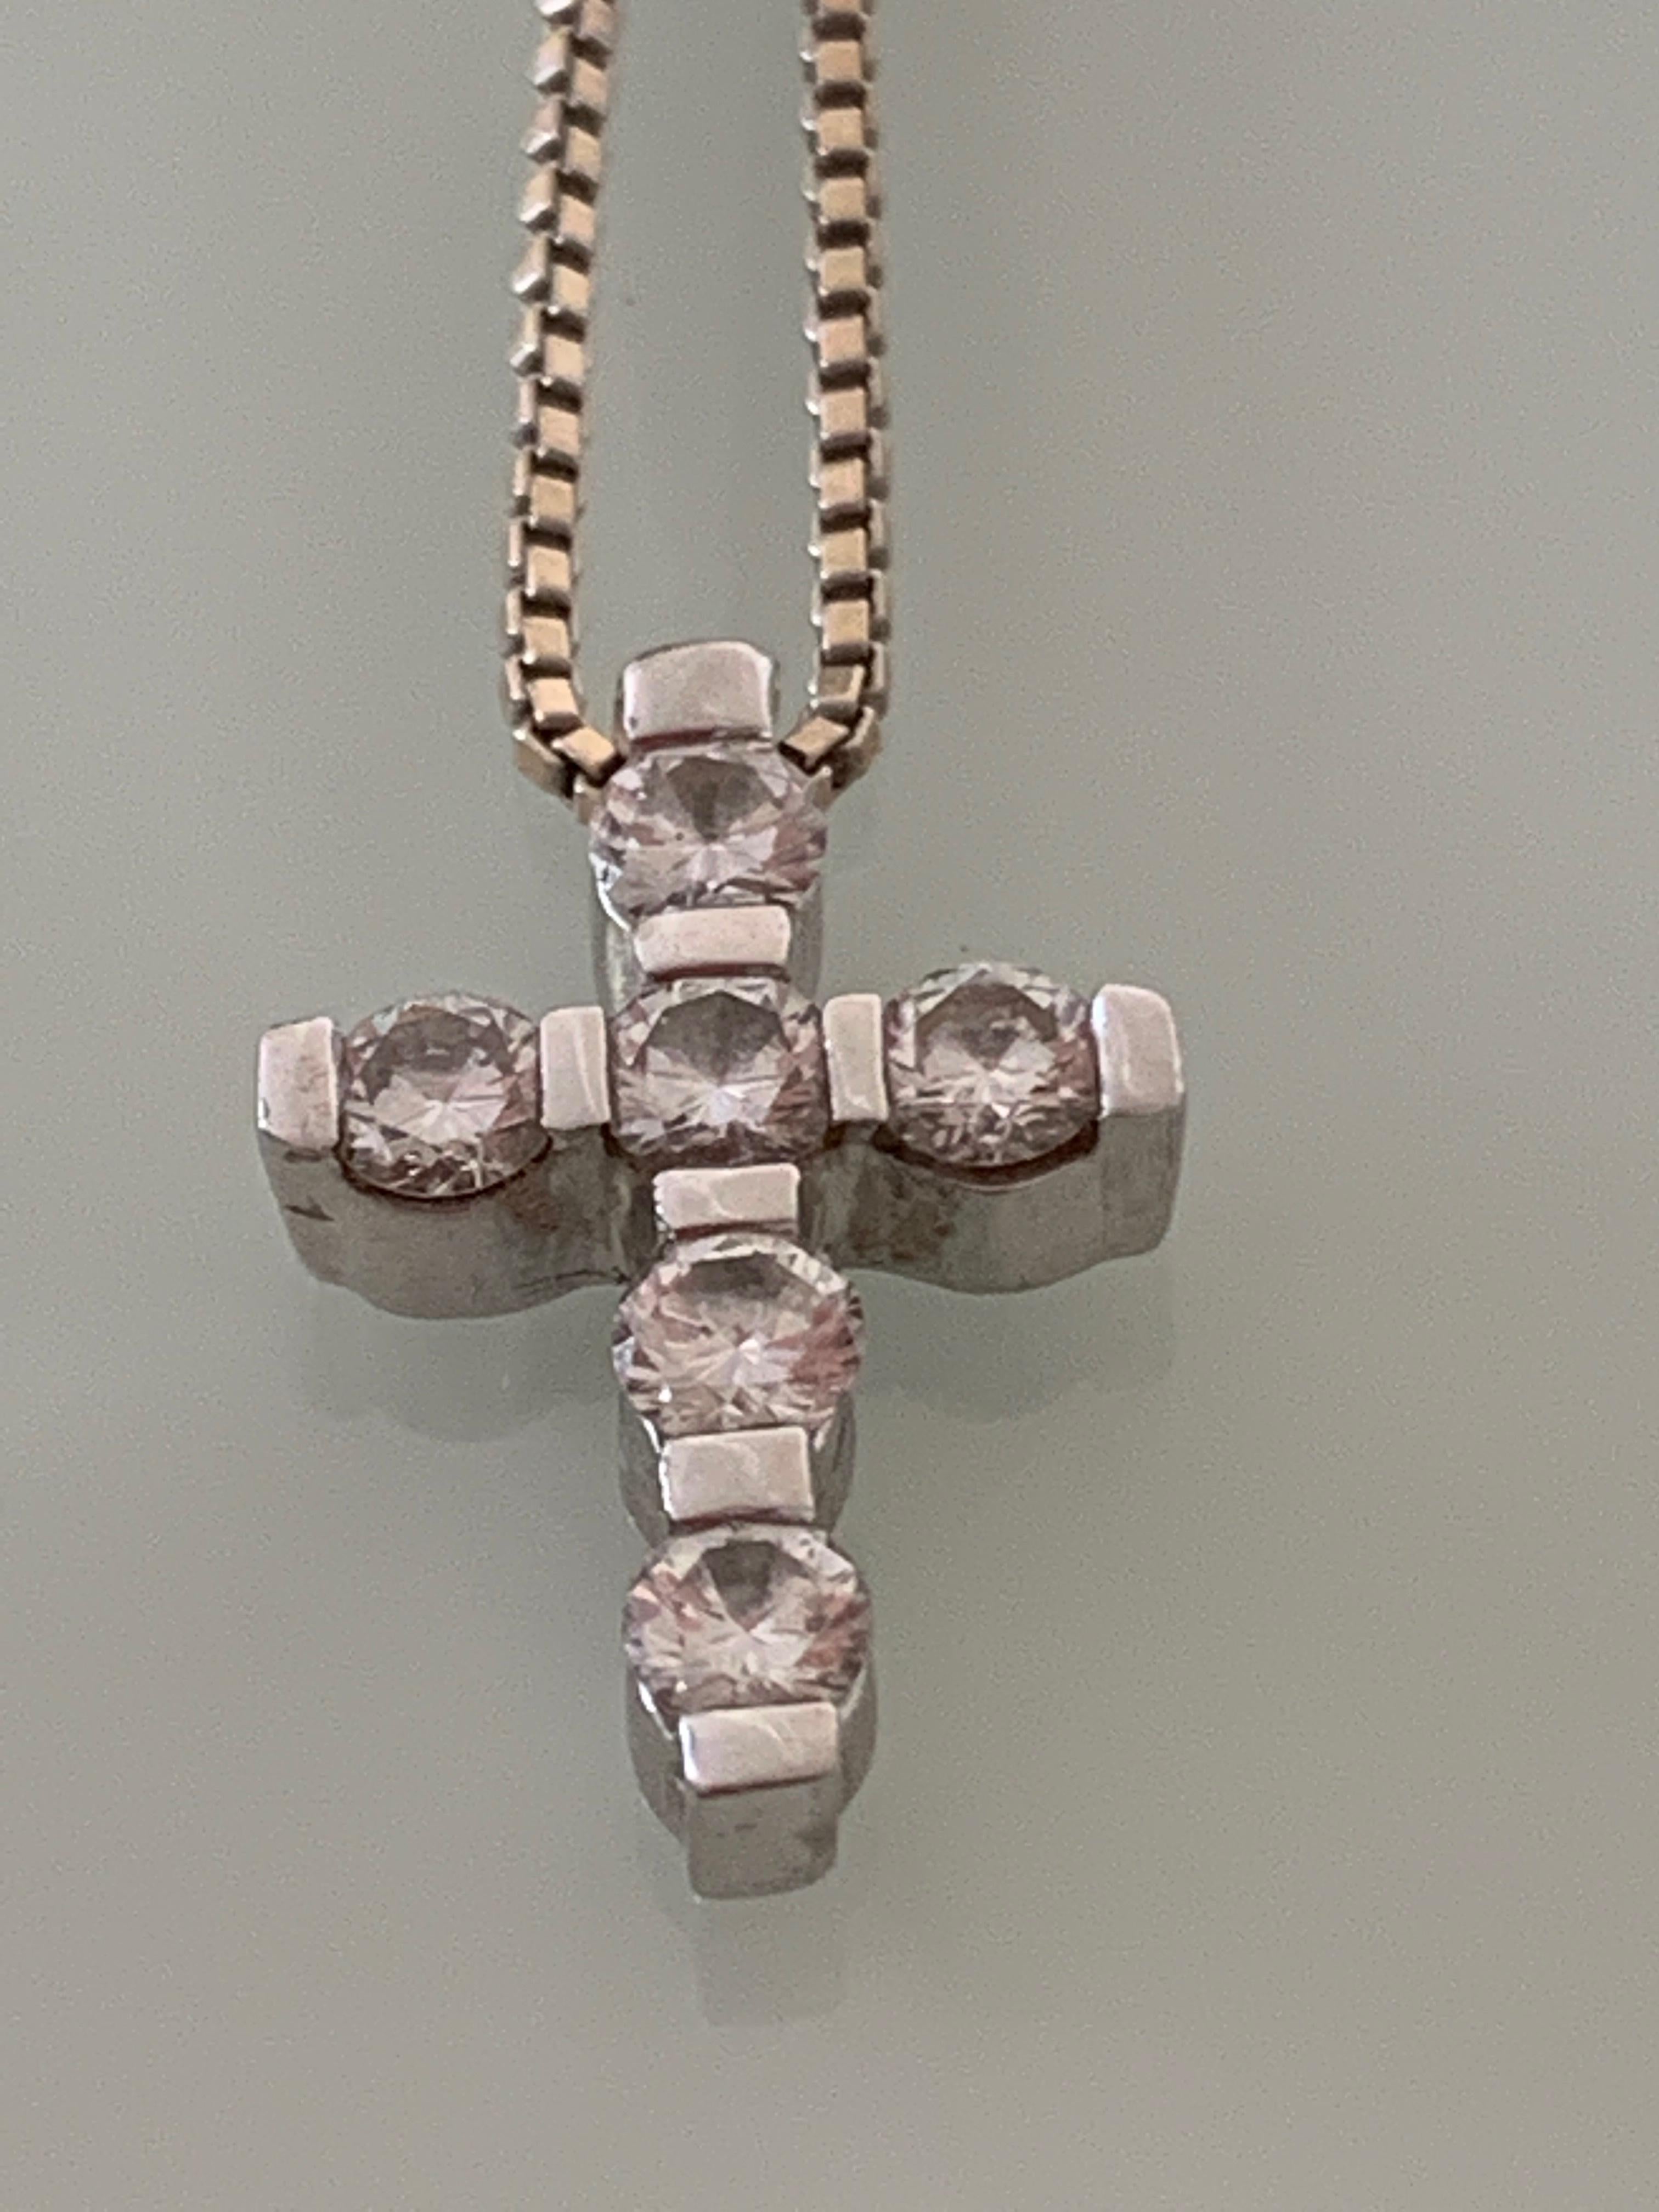 18ct White Gold necklace by Designer Goldsmiths Leo Pizzo
Length of chain 16.8 Inches
Thickness of chain 1mm
Cross has six beautiful natural diamonds
of high quality .
Each diamond measures 3mm across head
6 x 0.11 carat = 0.66 Carats
Total weight